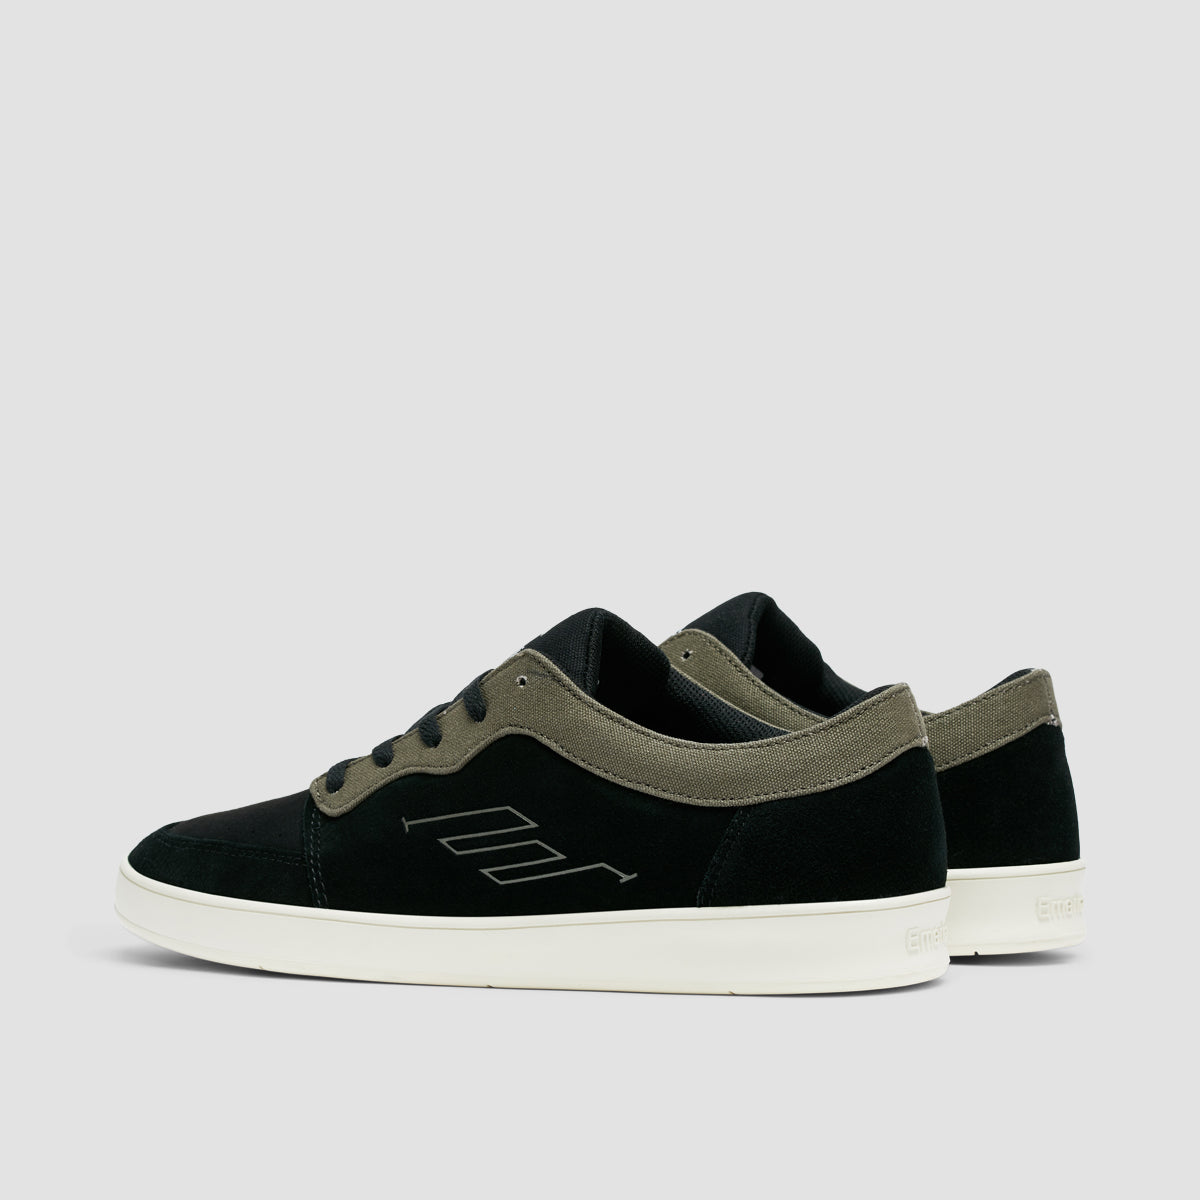 Emerica Quentin Shoes Black/Olive